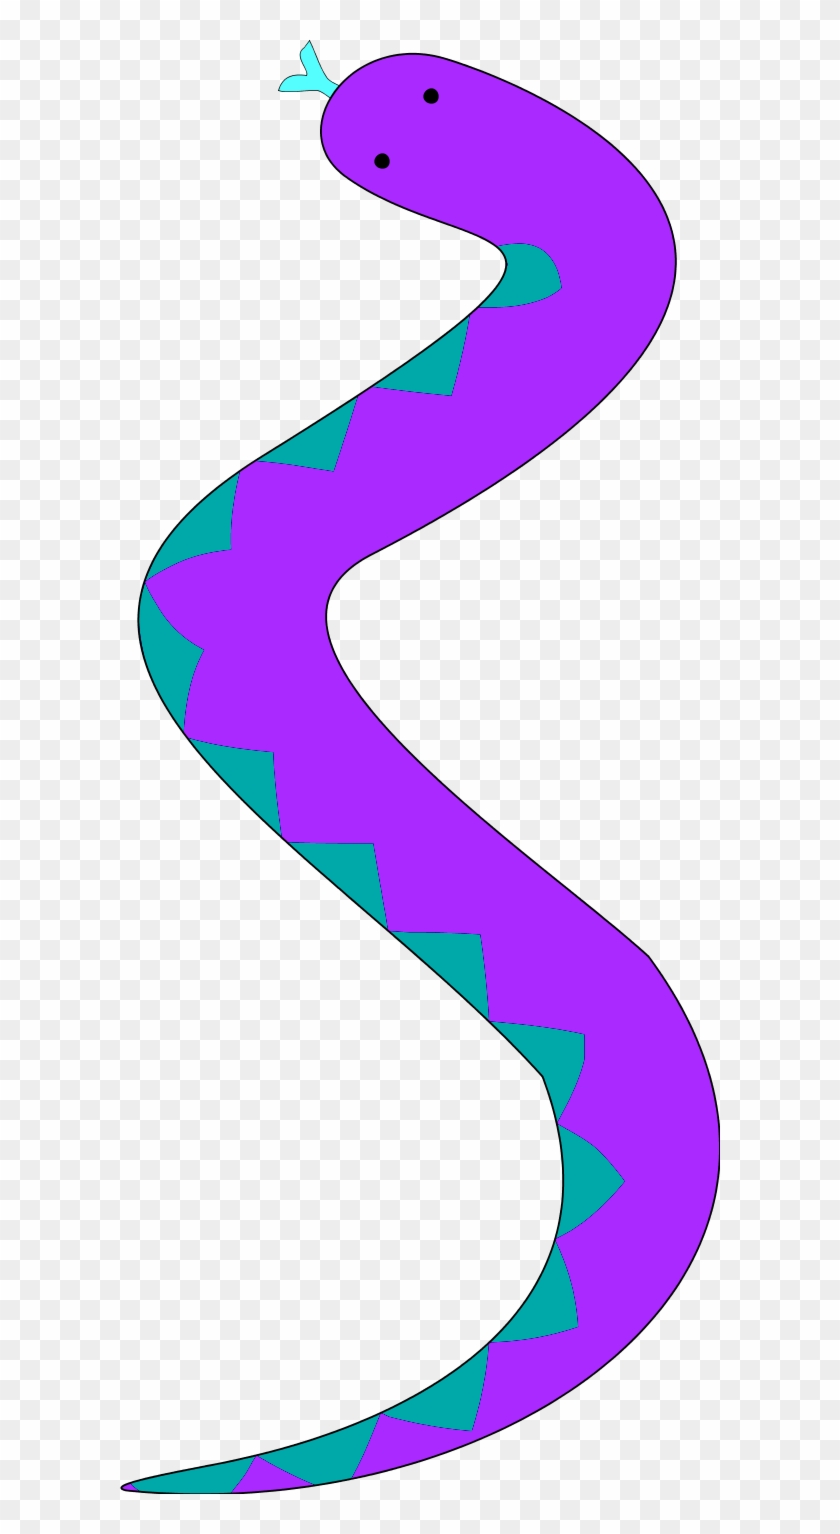 Clip Arts Related To - Snake For Snakes And Ladders #162115